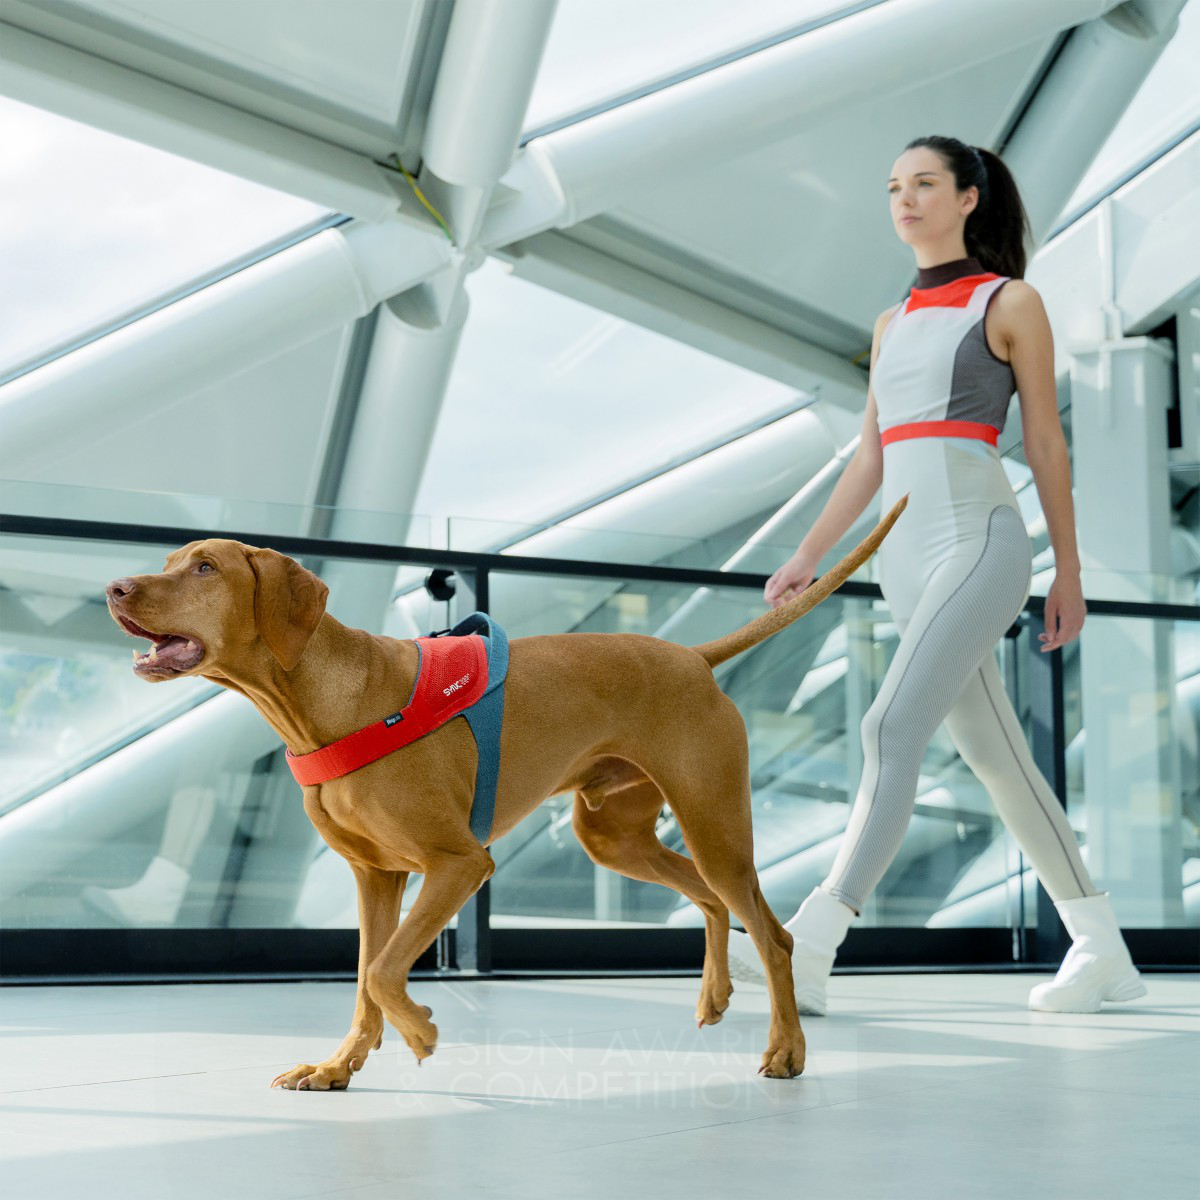 Alberto Vasquez wins Golden at the prestigious A' Pet Care, Toys, Supplies and Products for Animals Design Award with JK9 Sync Smart Dog Harness.